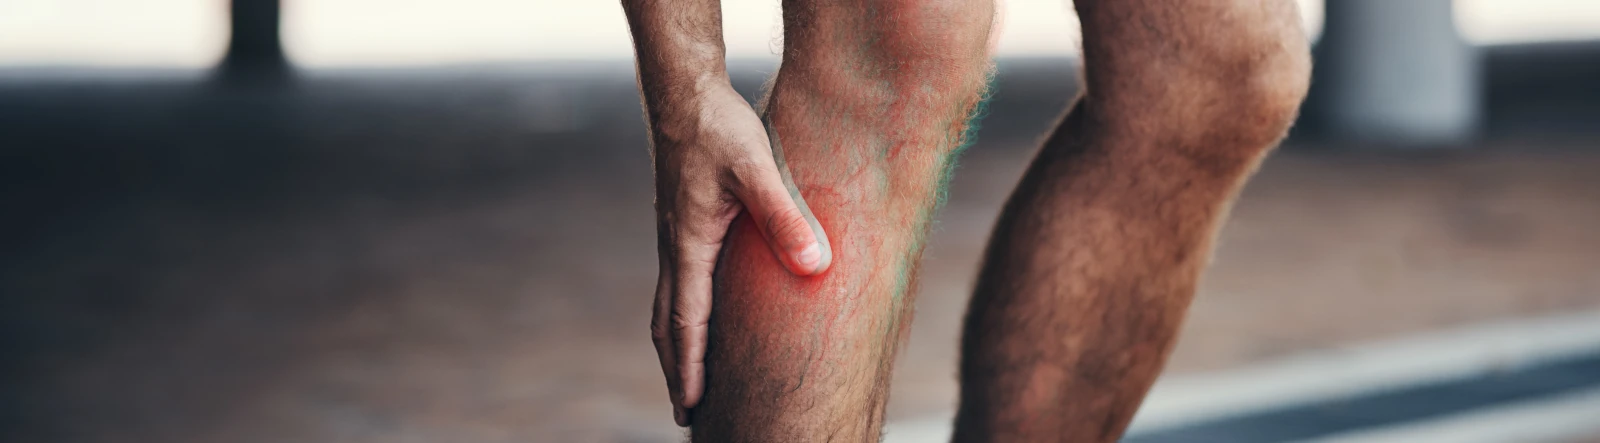 A runner holding his shin, which appears inflamed